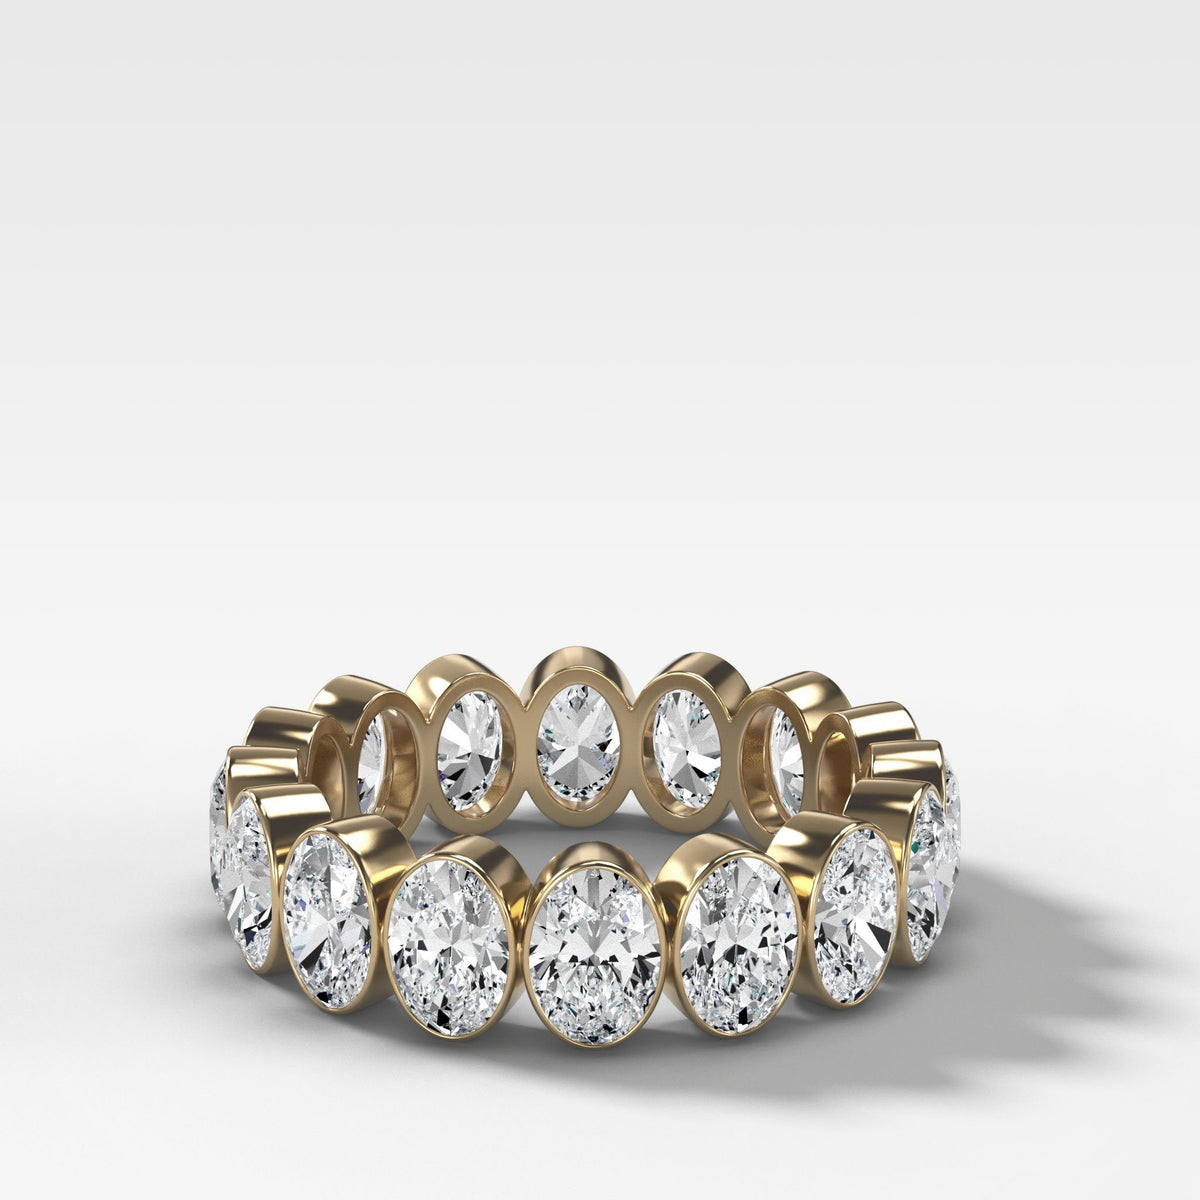 Bezel Set Eternity Band With Oval Cuts by Good Stone in Yellow Gold